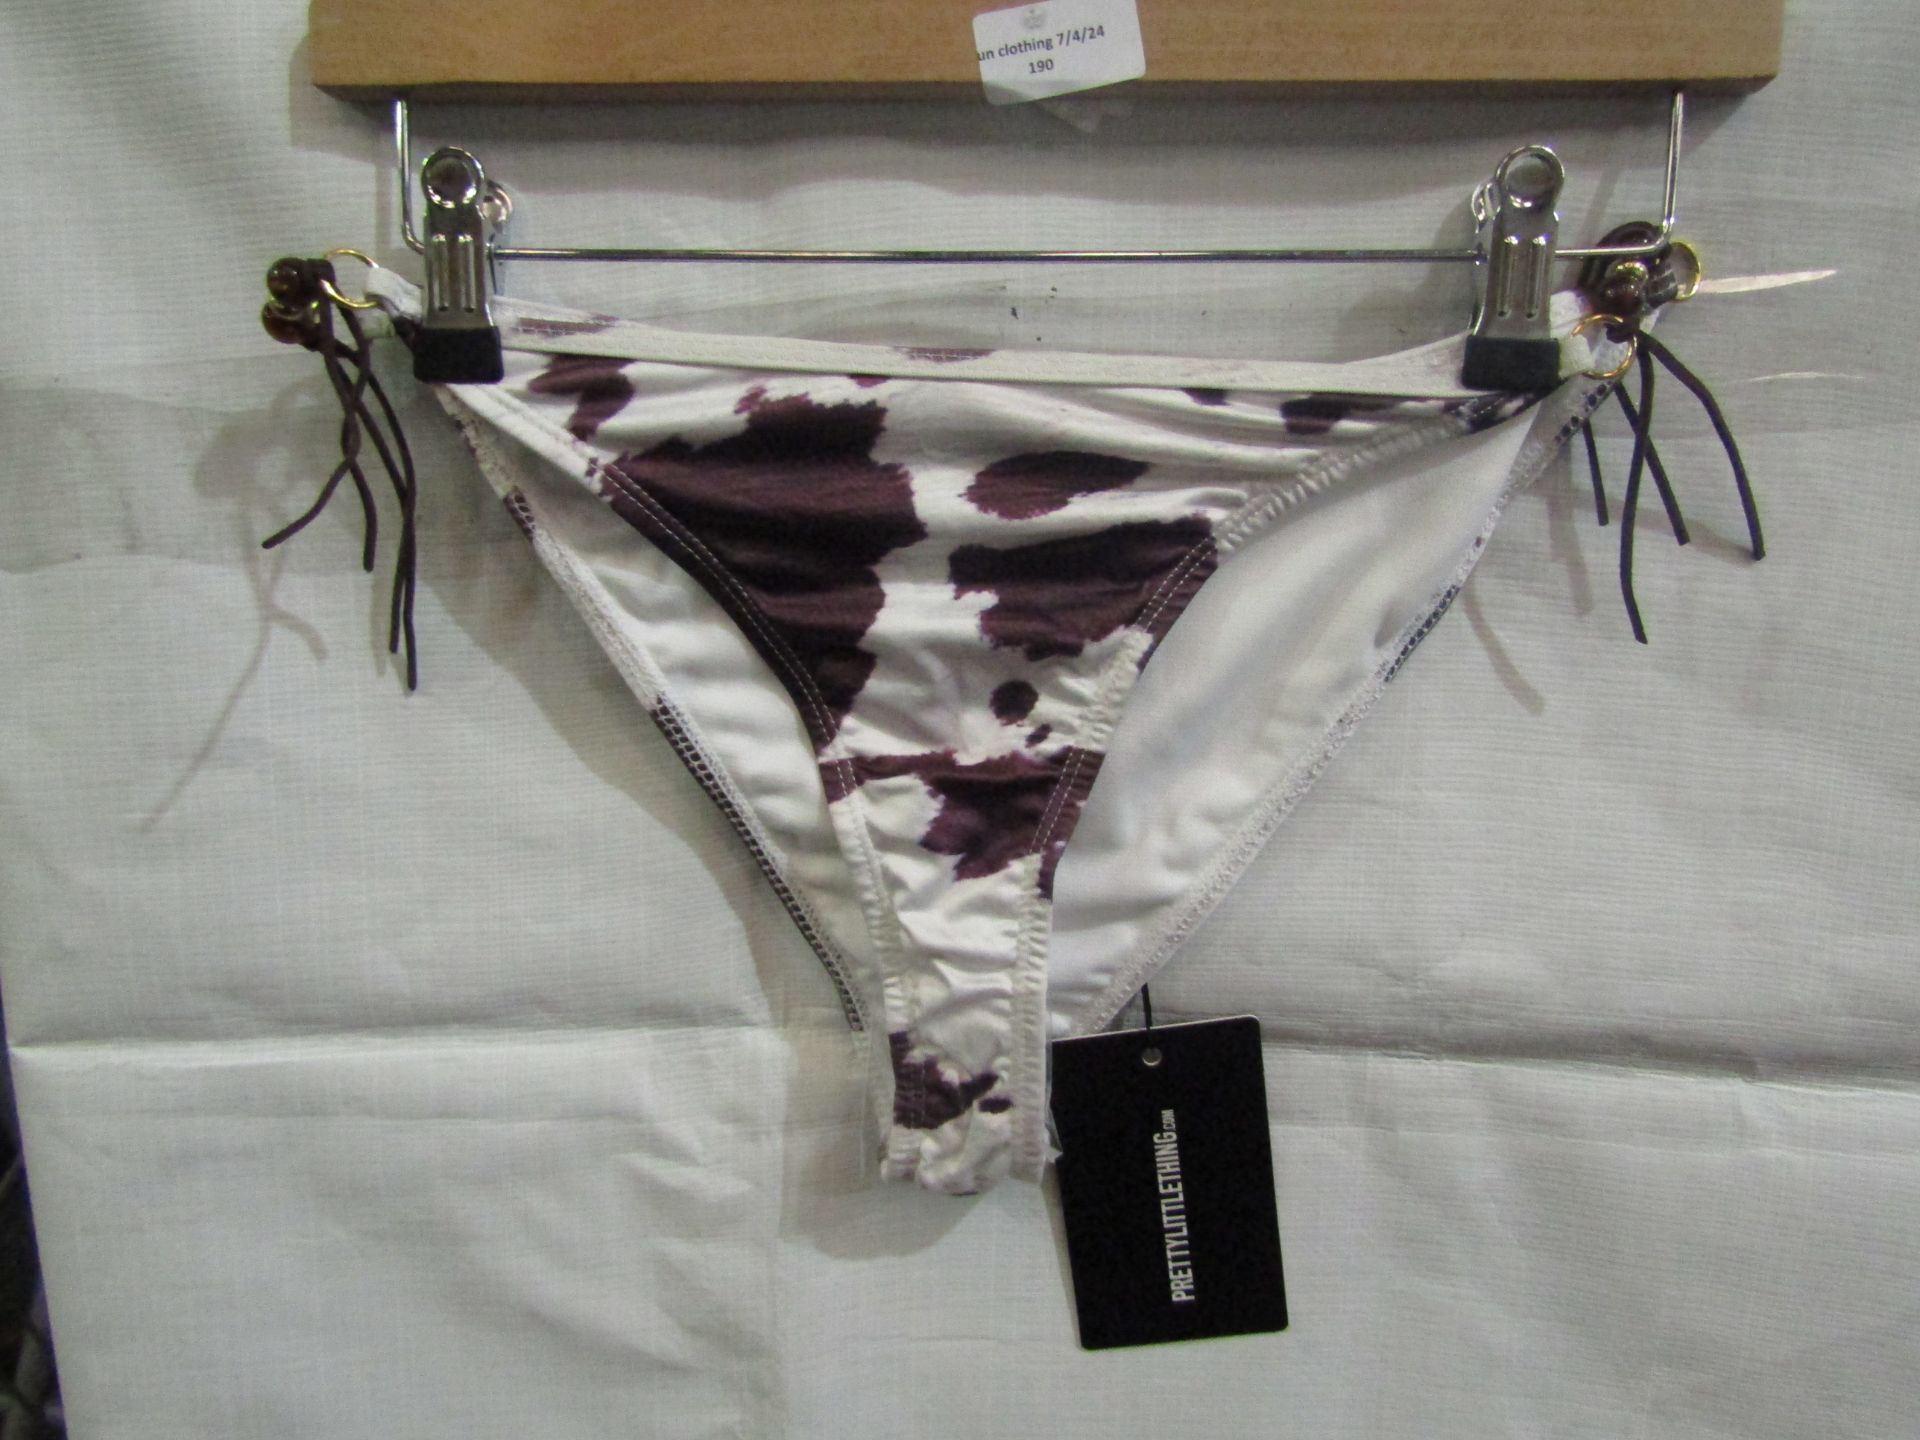 2x Pretty Little Thing Brown Cow Print Beaded Tie Bikini"s - Size 12, New & Packaged.